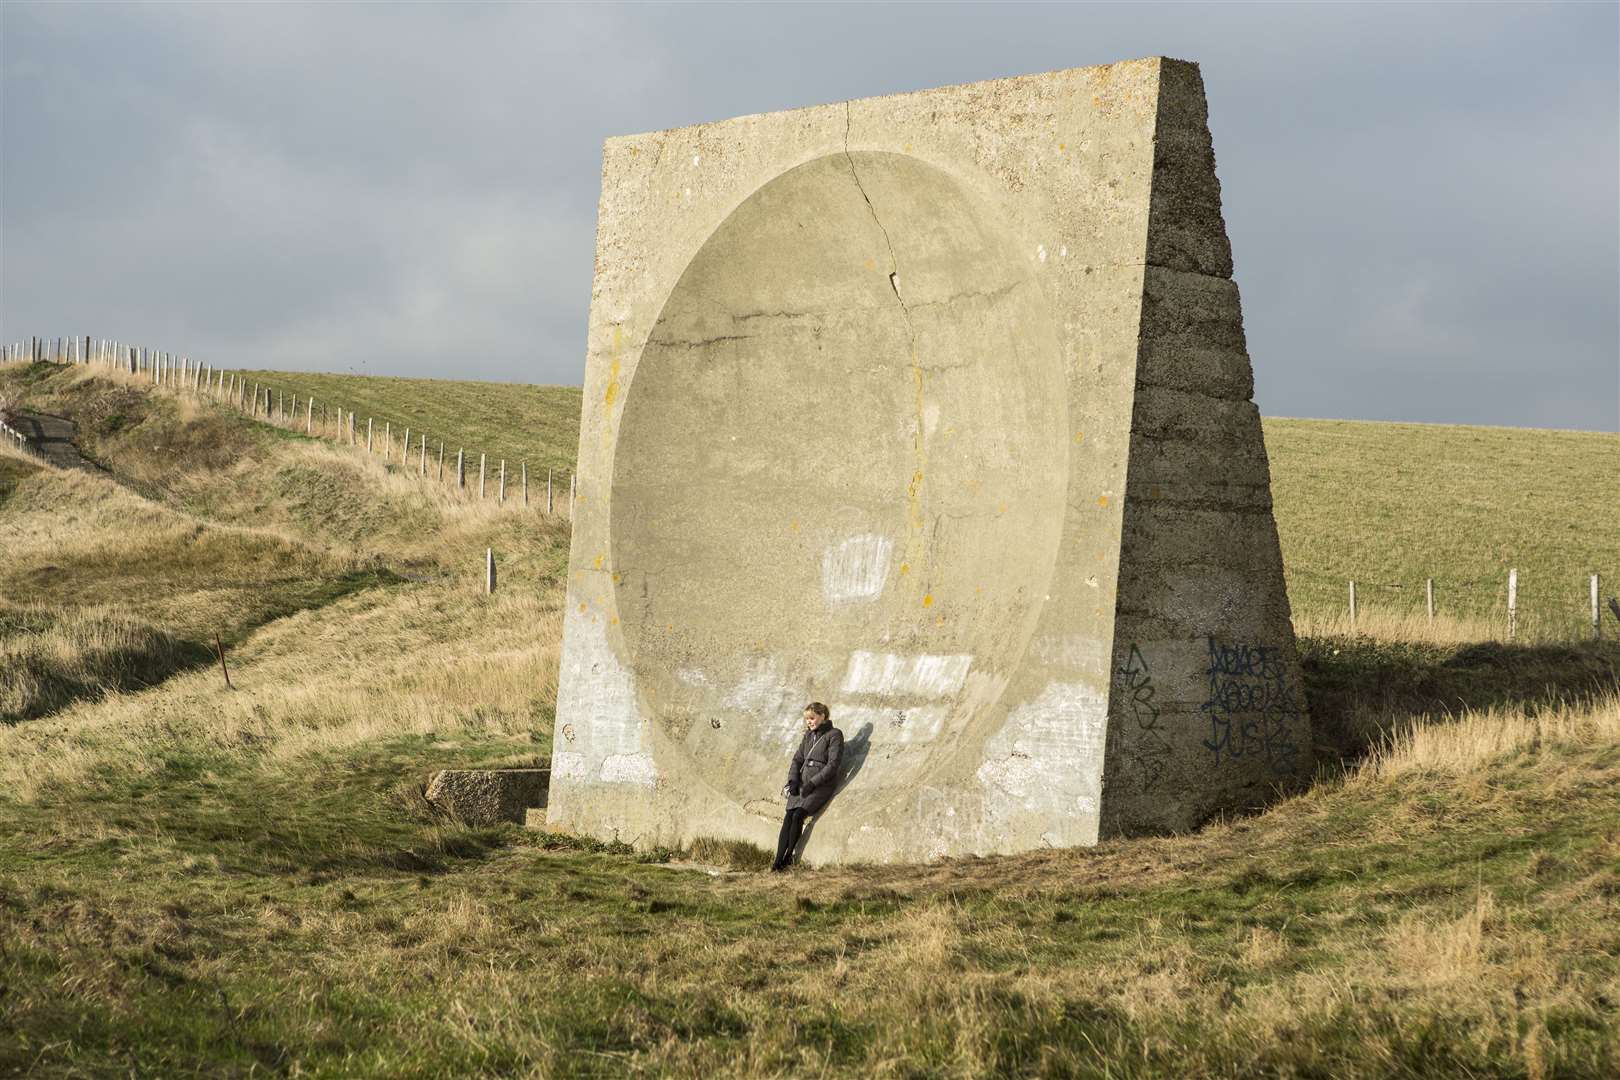 The sound mirror at Abbot's Cliff is frequently shown in the series. Credit: BBC. Photographer: Luke Varley